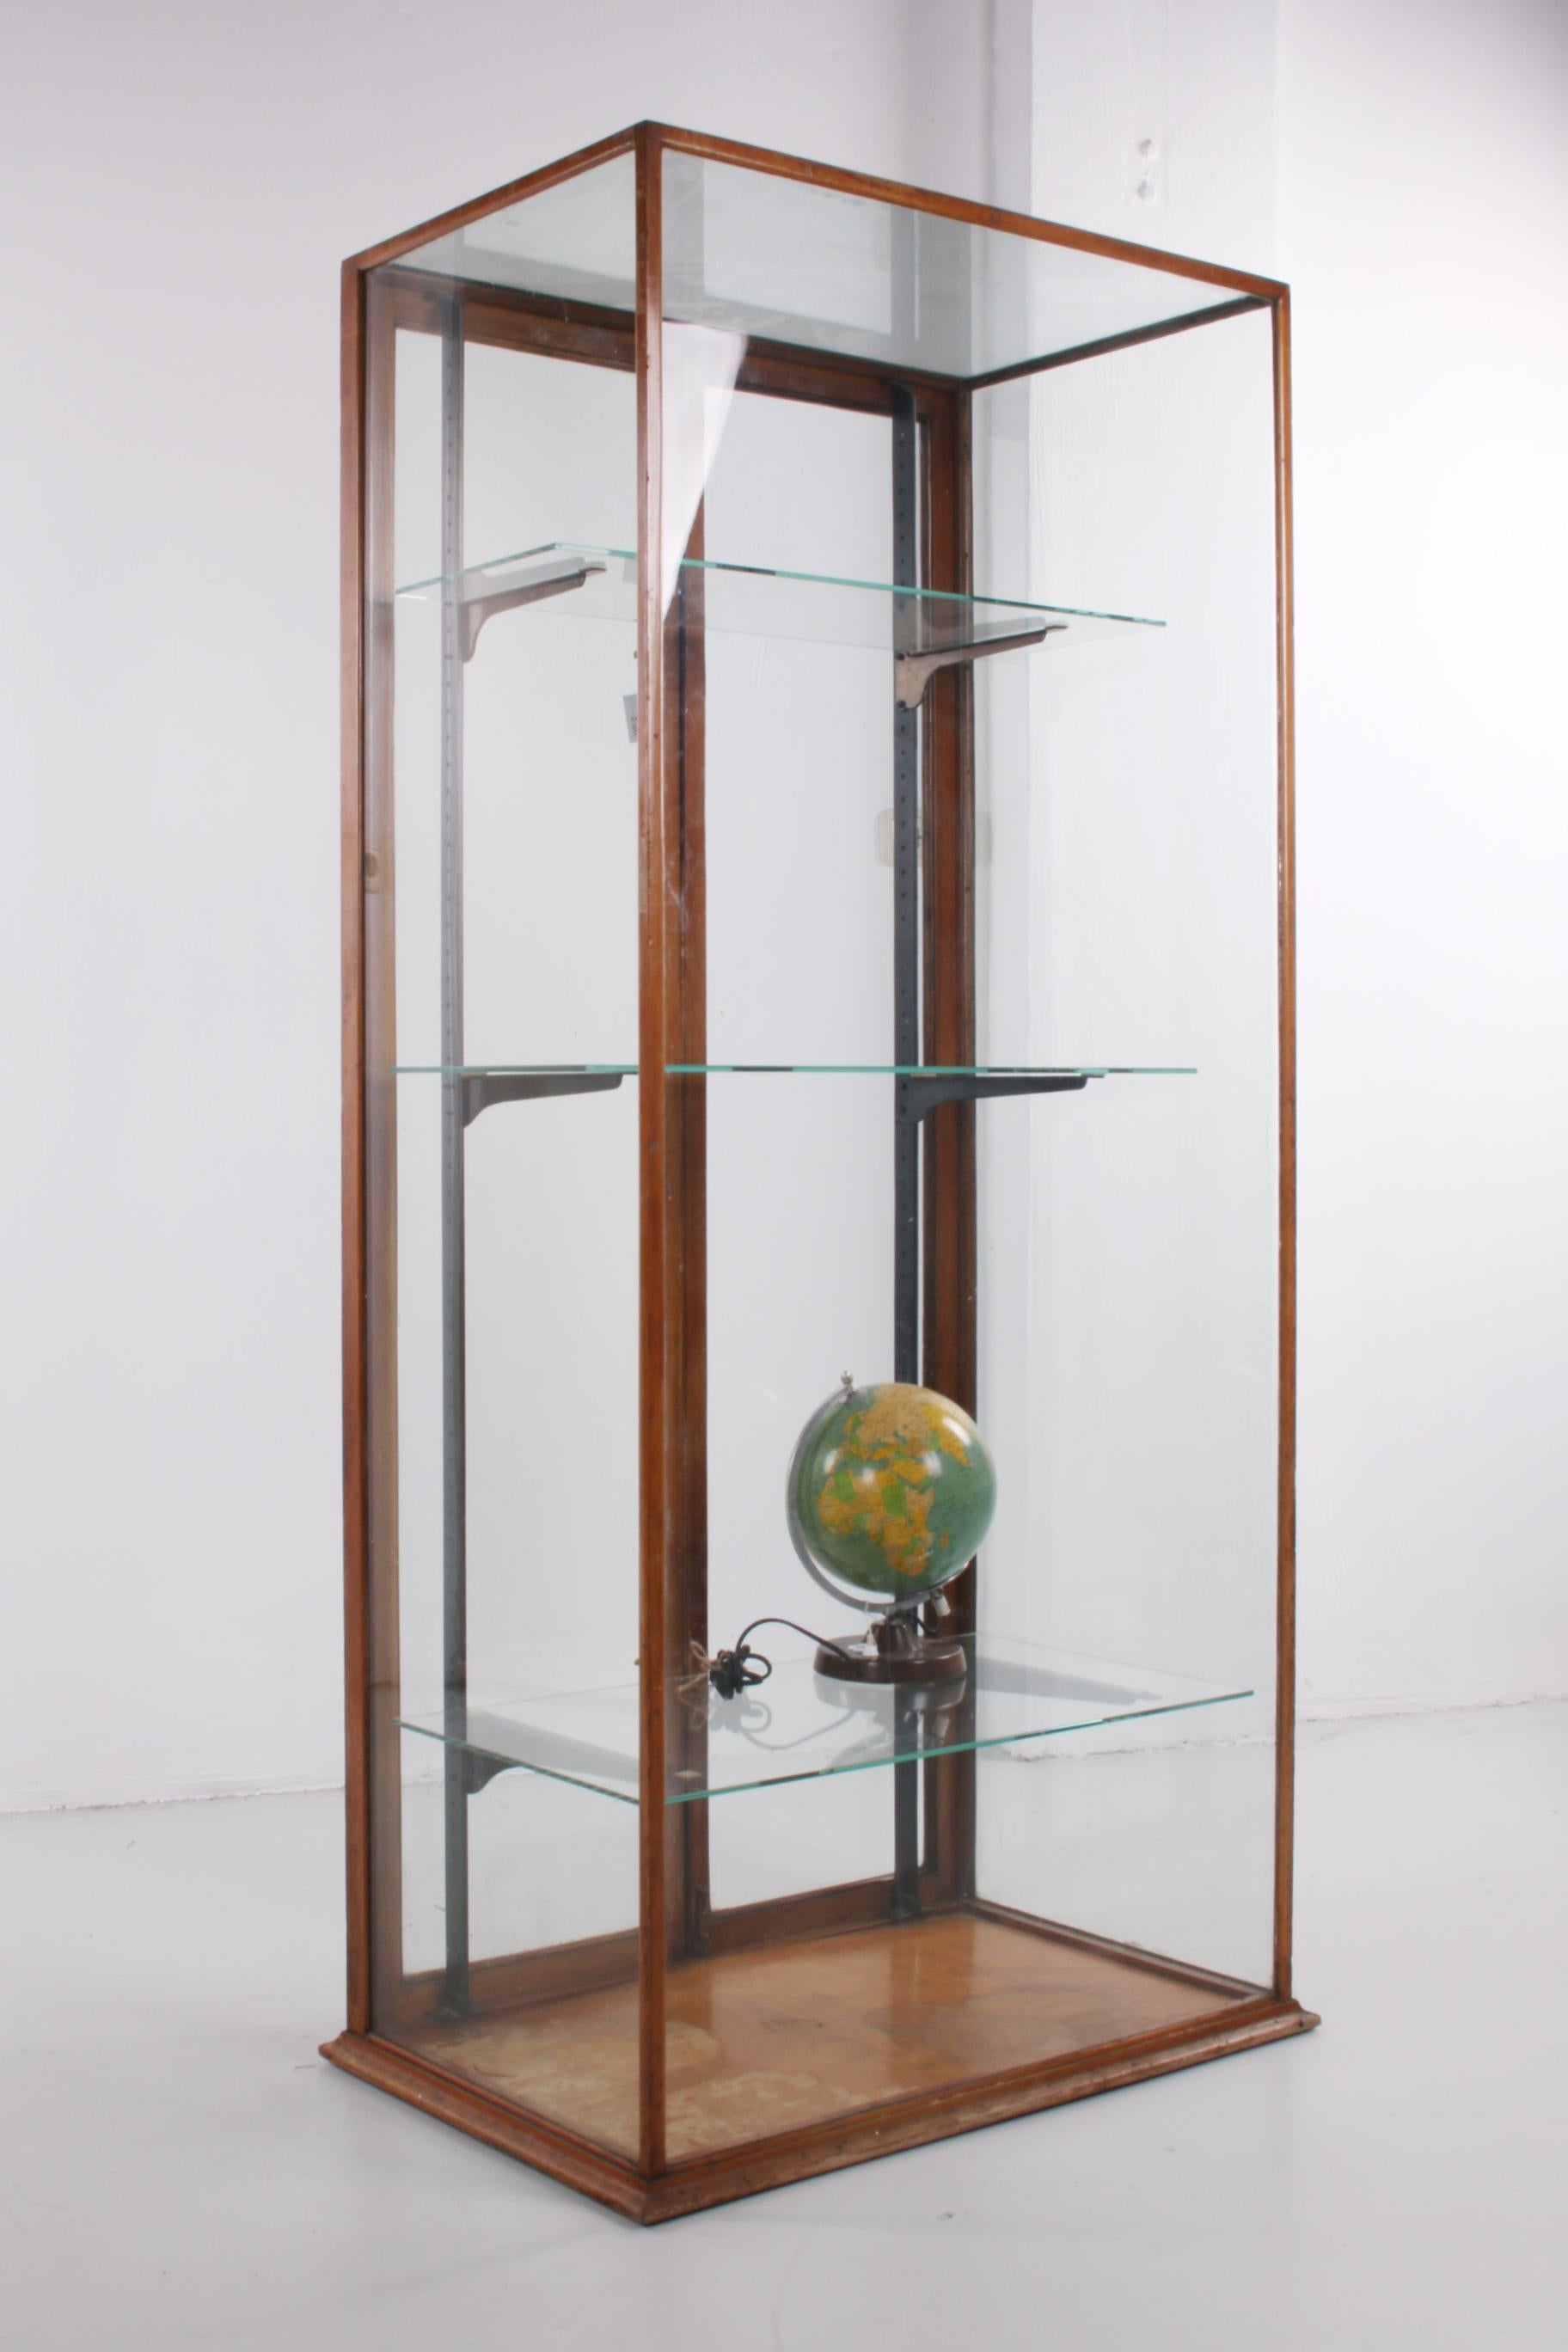 A beautiful display cabinet from England. This one originally comes from one of the better clothing stores in London, where valuable items were often displayed. 

The cabinet has 2 doors at the back, which you can open completely. The frame of the